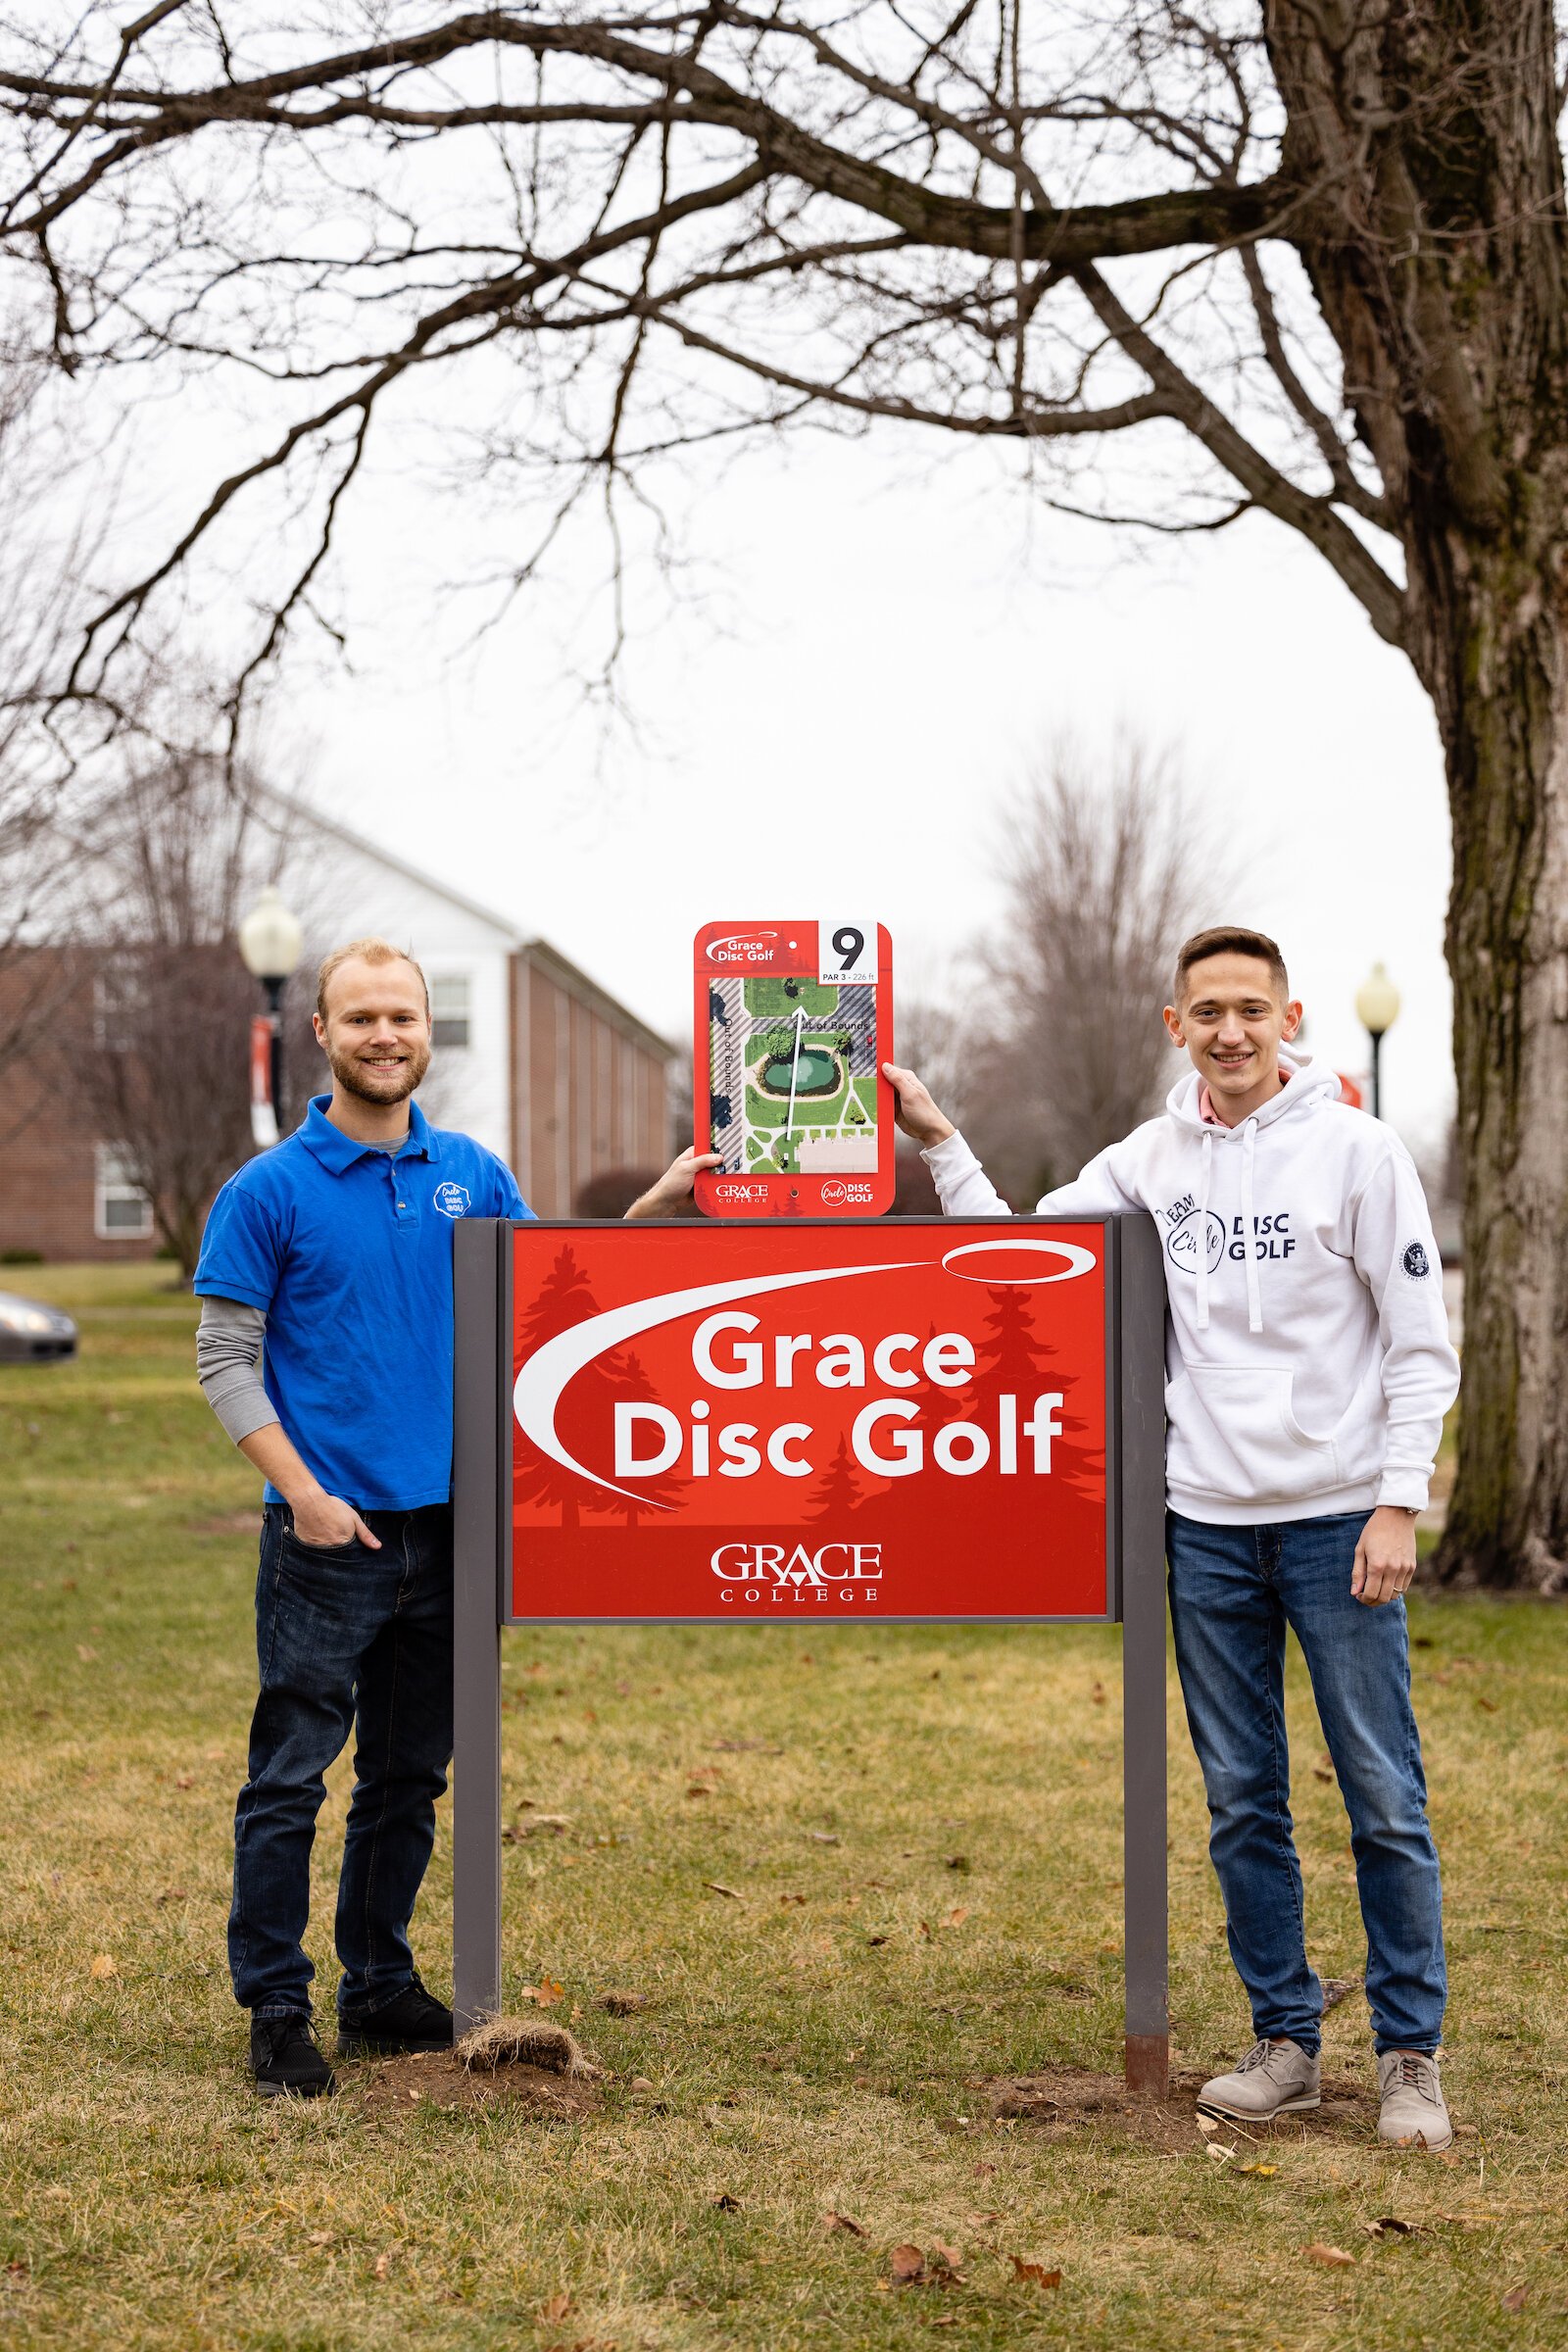 Andy Phipps and Alaister McFarren, both graduates of Grace College, recently opened Circle Disc Golf in Warsaw.